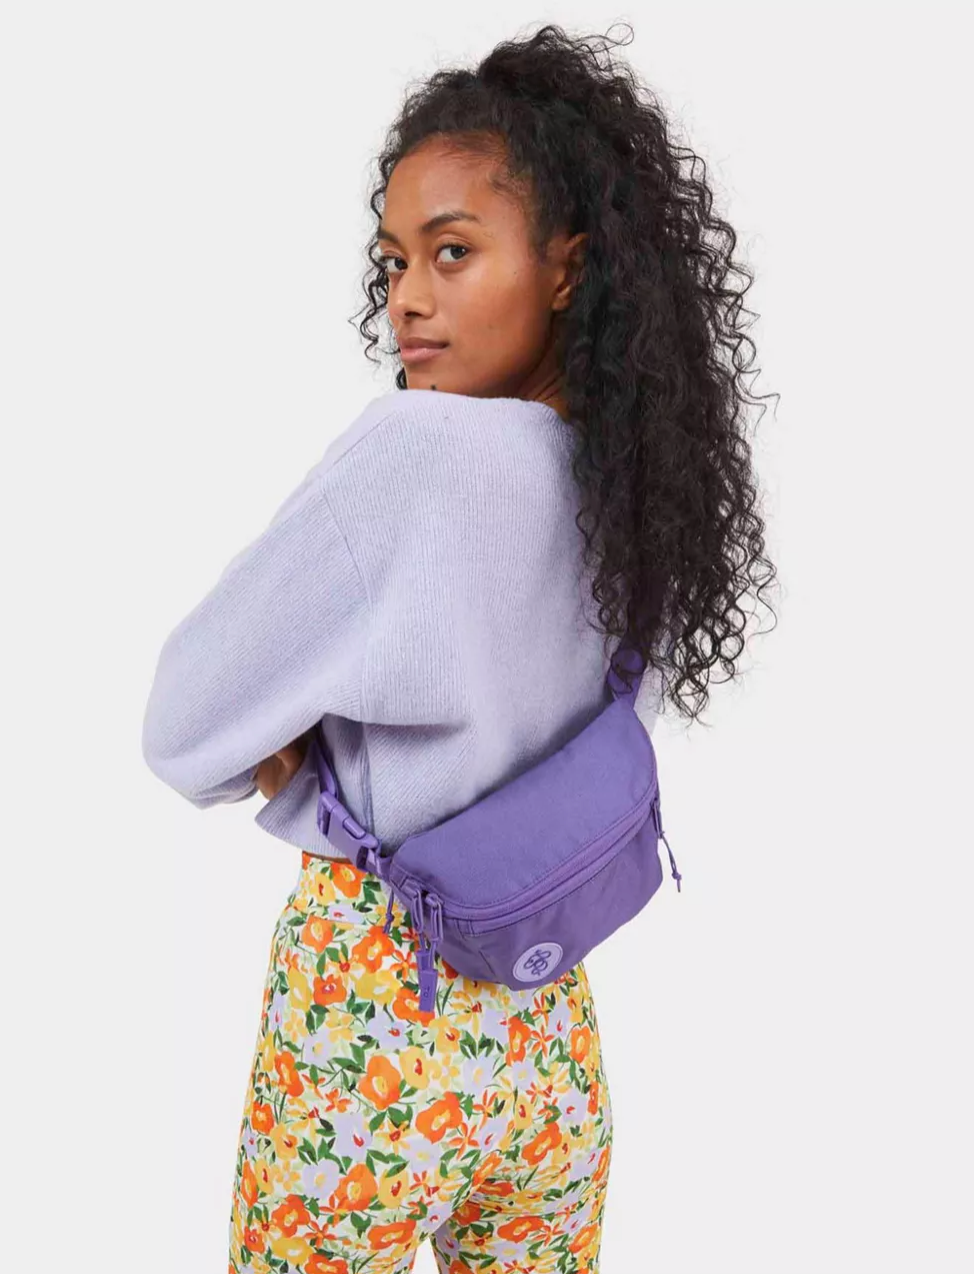 28 Best Fanny Packs And Belt Bags To Carry Your Stuff